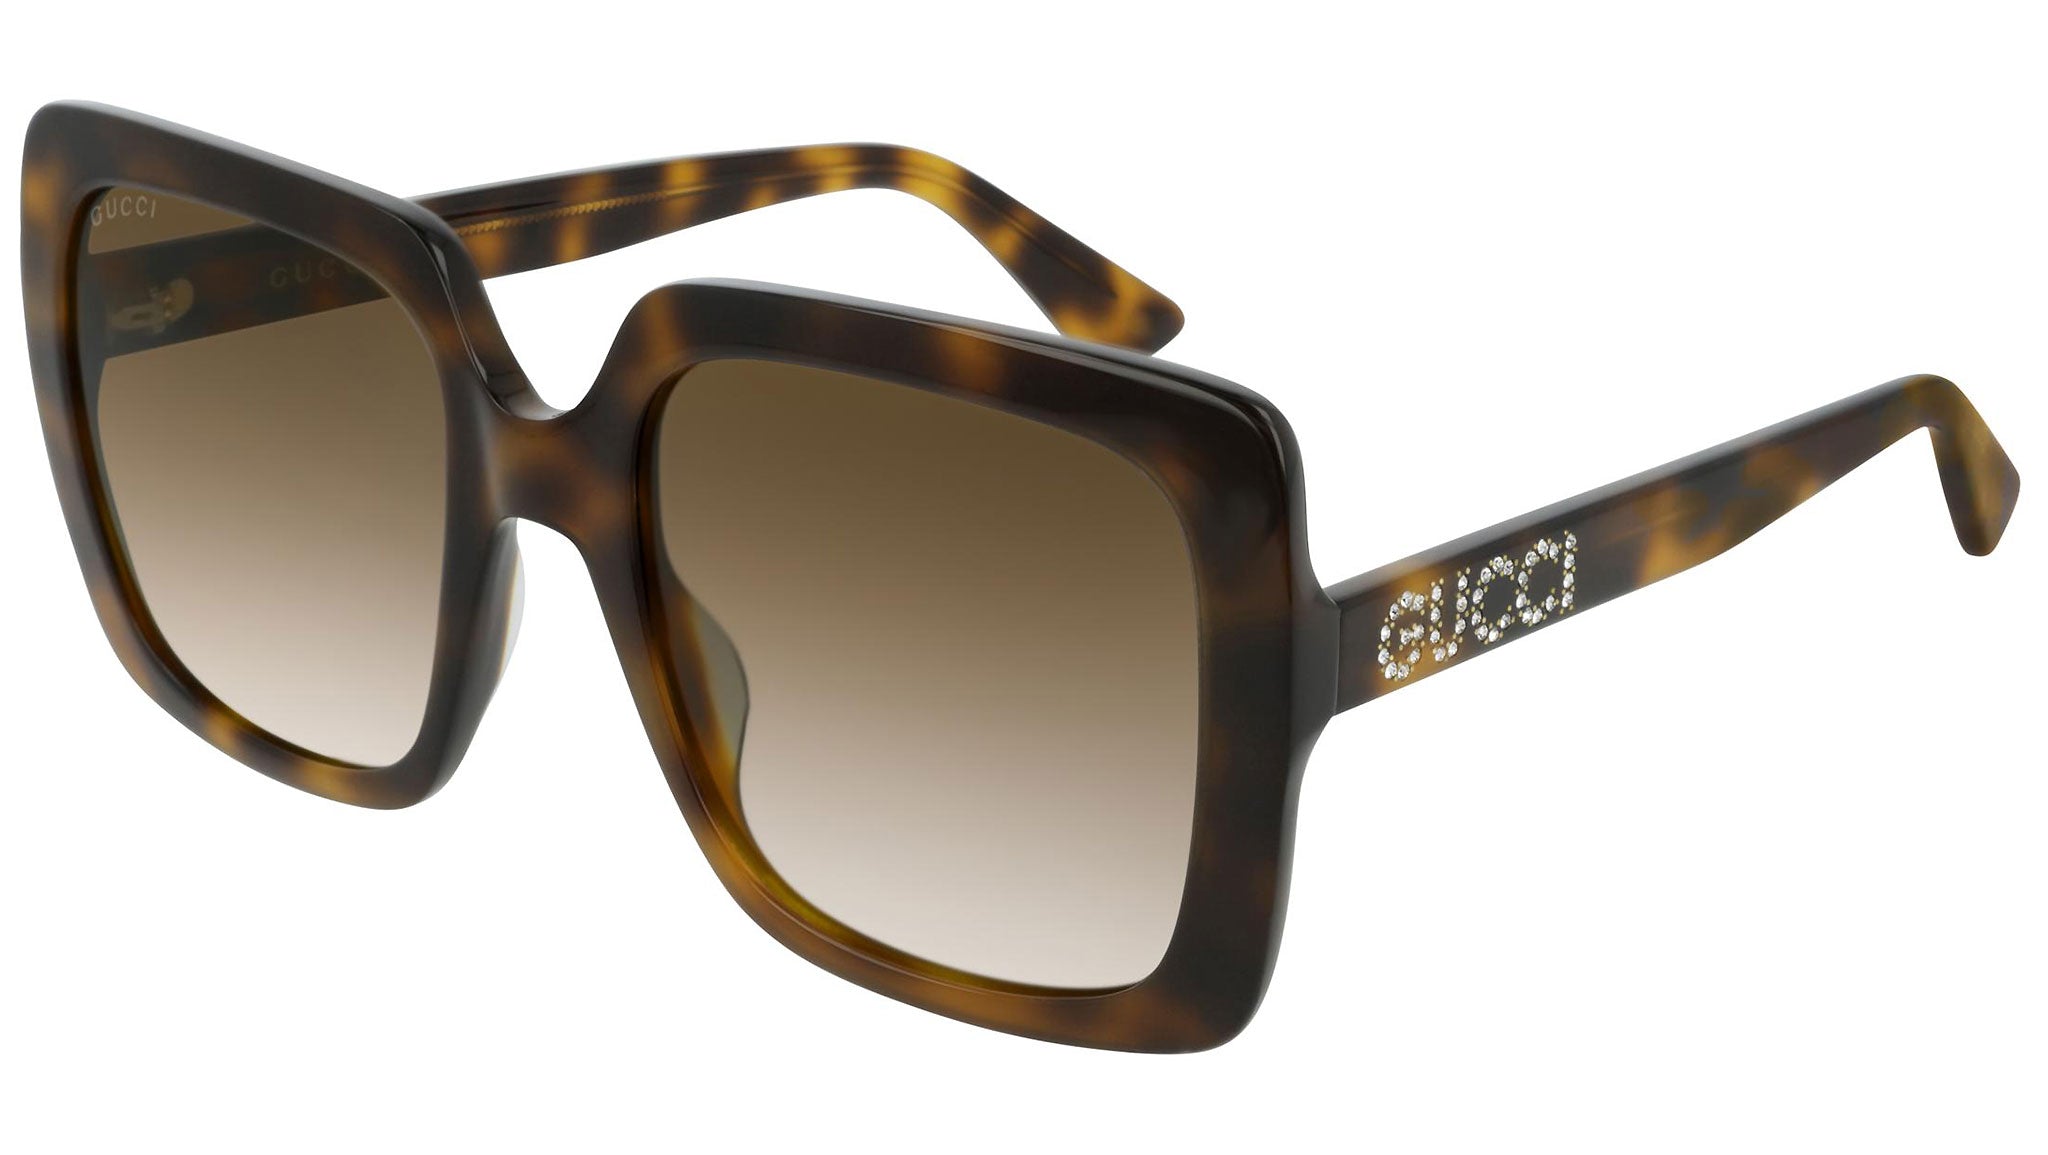 GG0418S shiny tortoise and brown